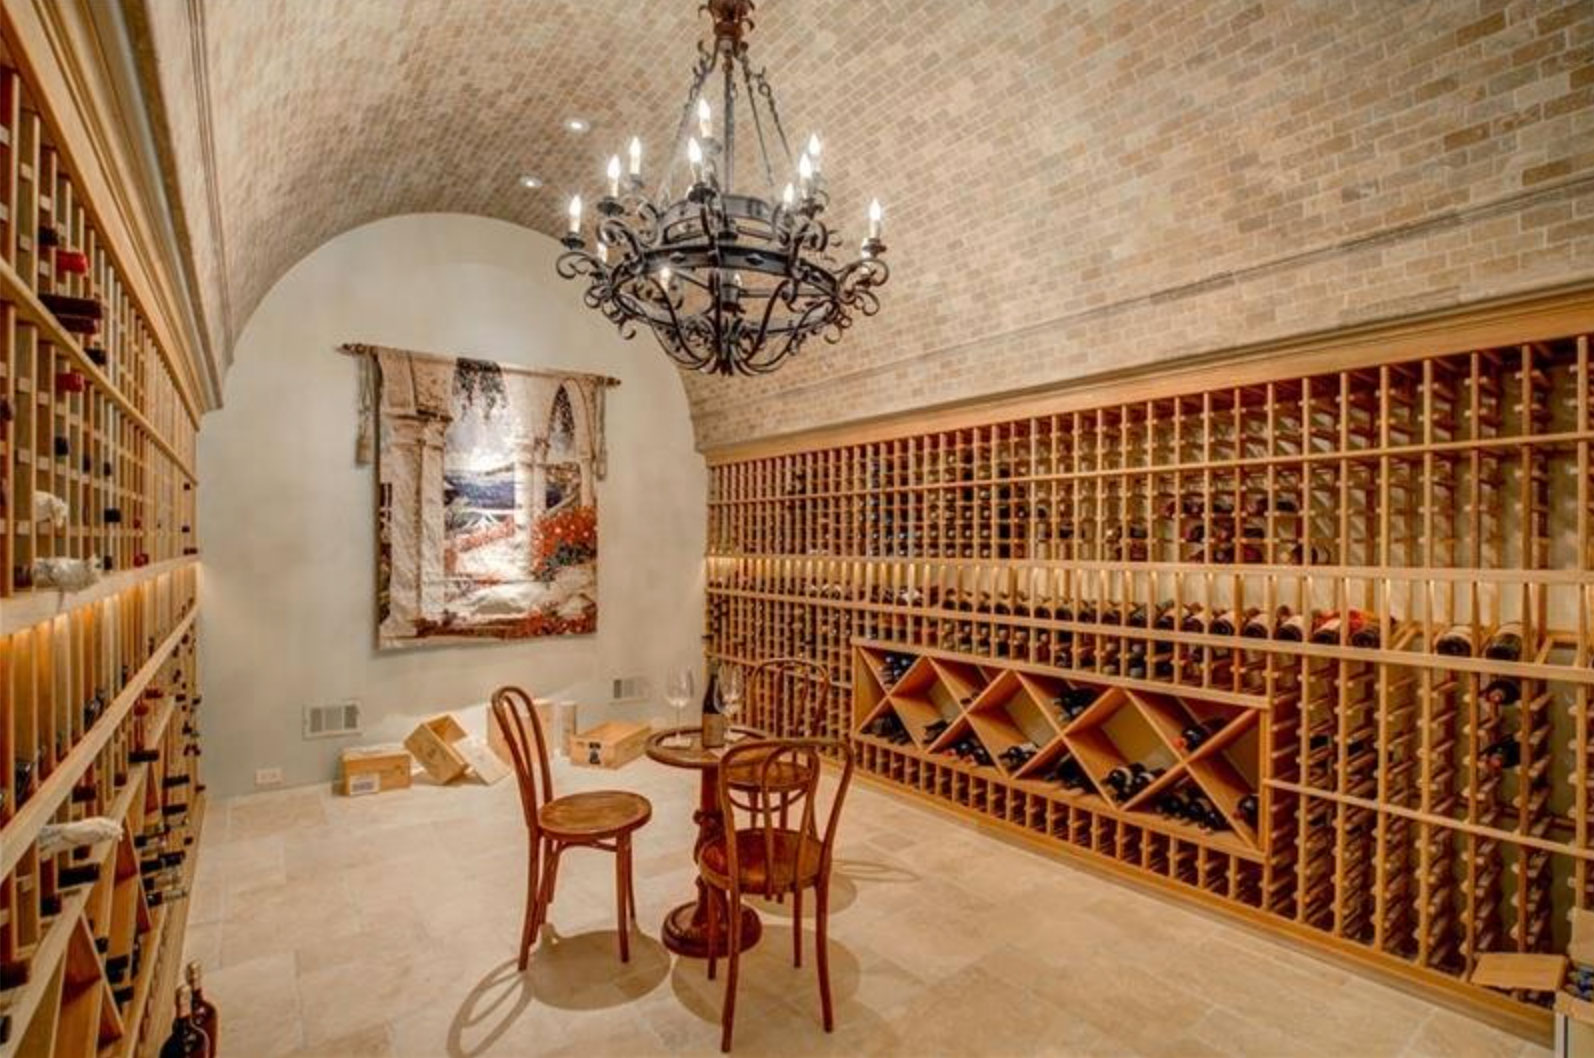 Cardi and Offset's home has a giant wine cellar and chandeliers in most of the rooms